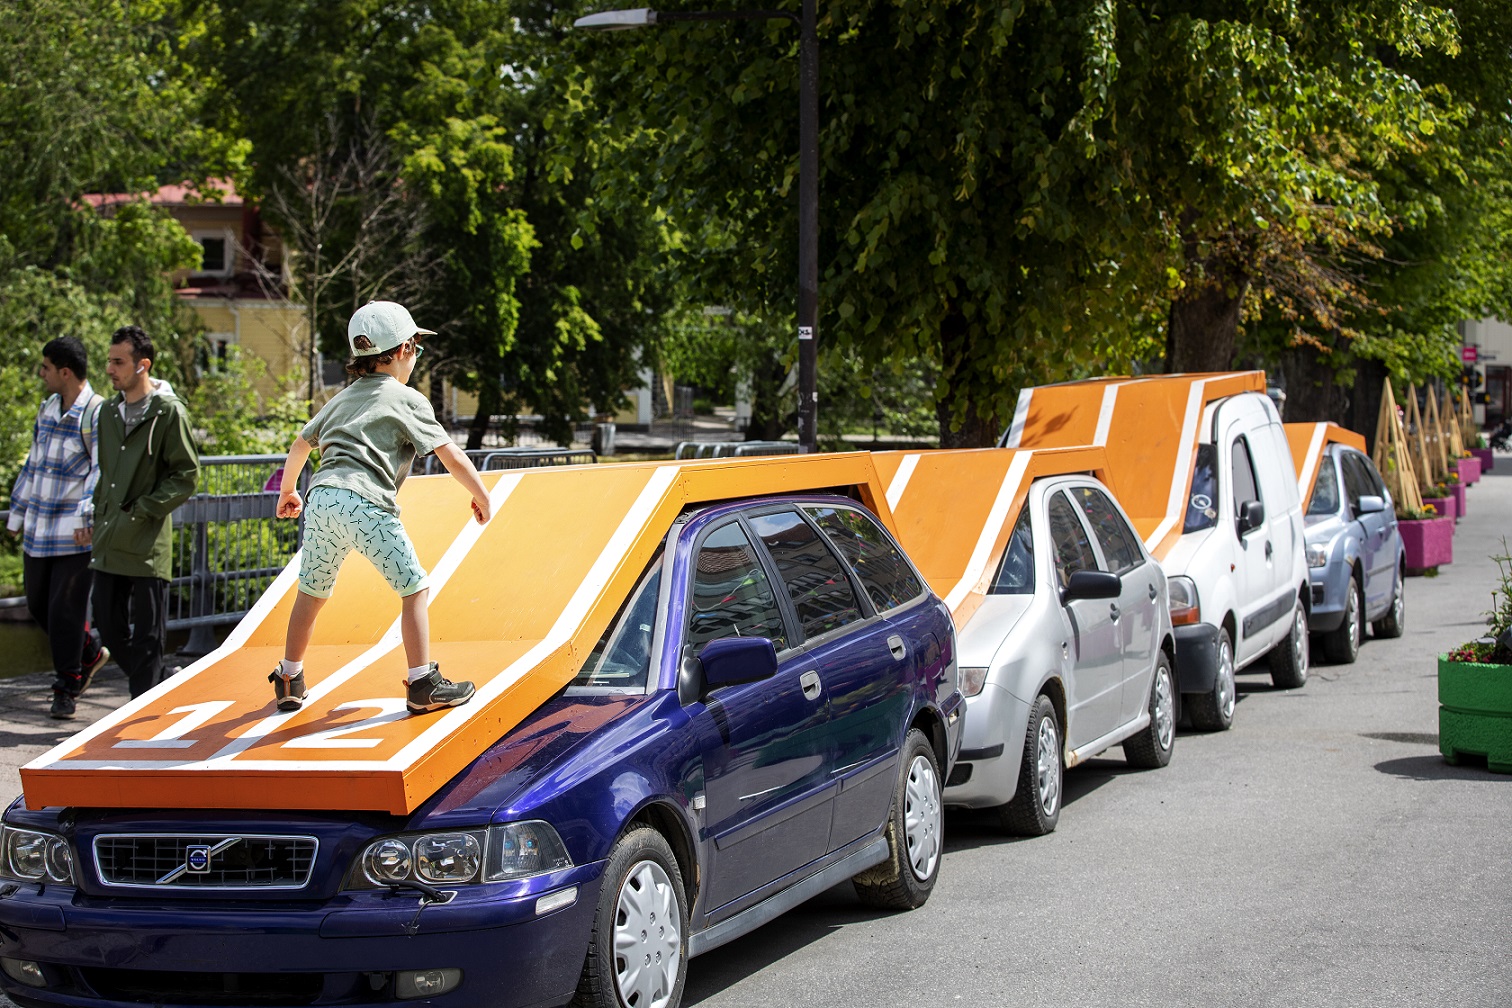 Outside there is four cars of different sizes and models are lined up on a street. Above the cars, the artist has built an orange running track with two tracks that follow the roof and shapes of the cars. The artwork opens up to the idea of a running race over the cars and in the picture a child has climbed onto the running track and is ready.